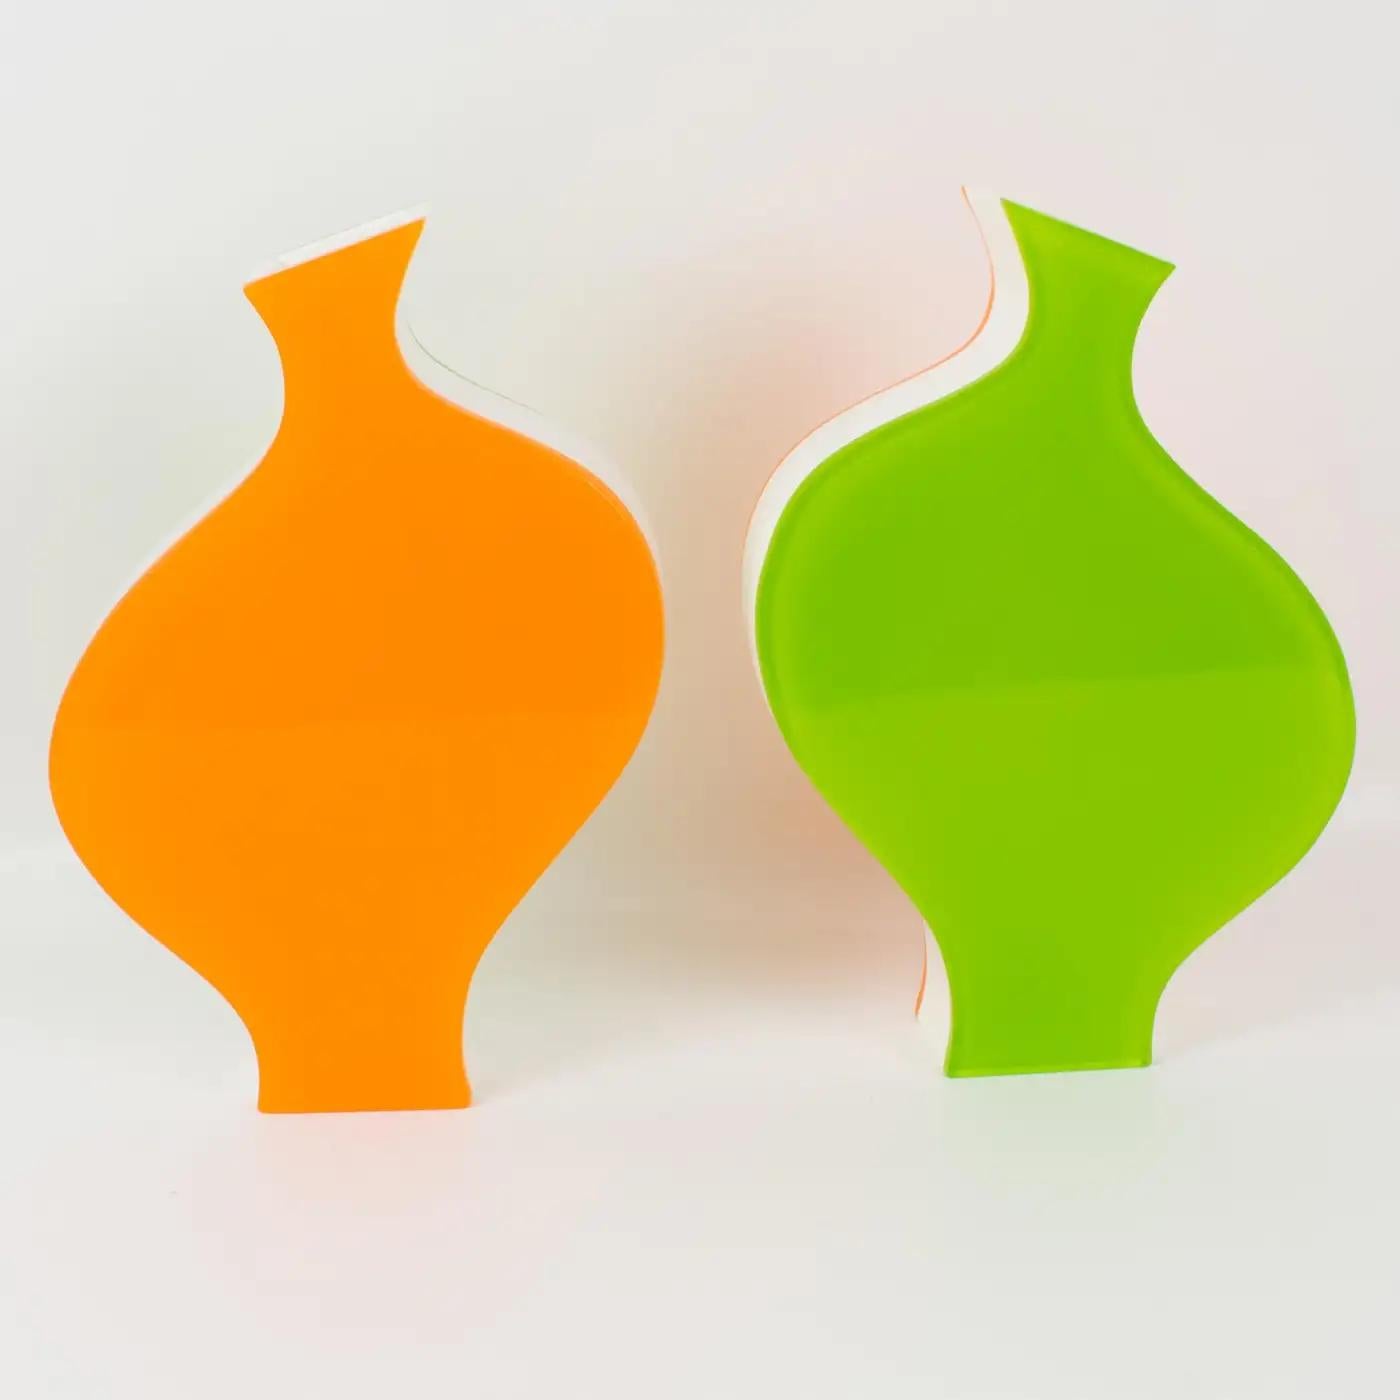 Villeroy & Boch Orange and Green Lucite Vases, 1990s In Excellent Condition For Sale In Atlanta, GA